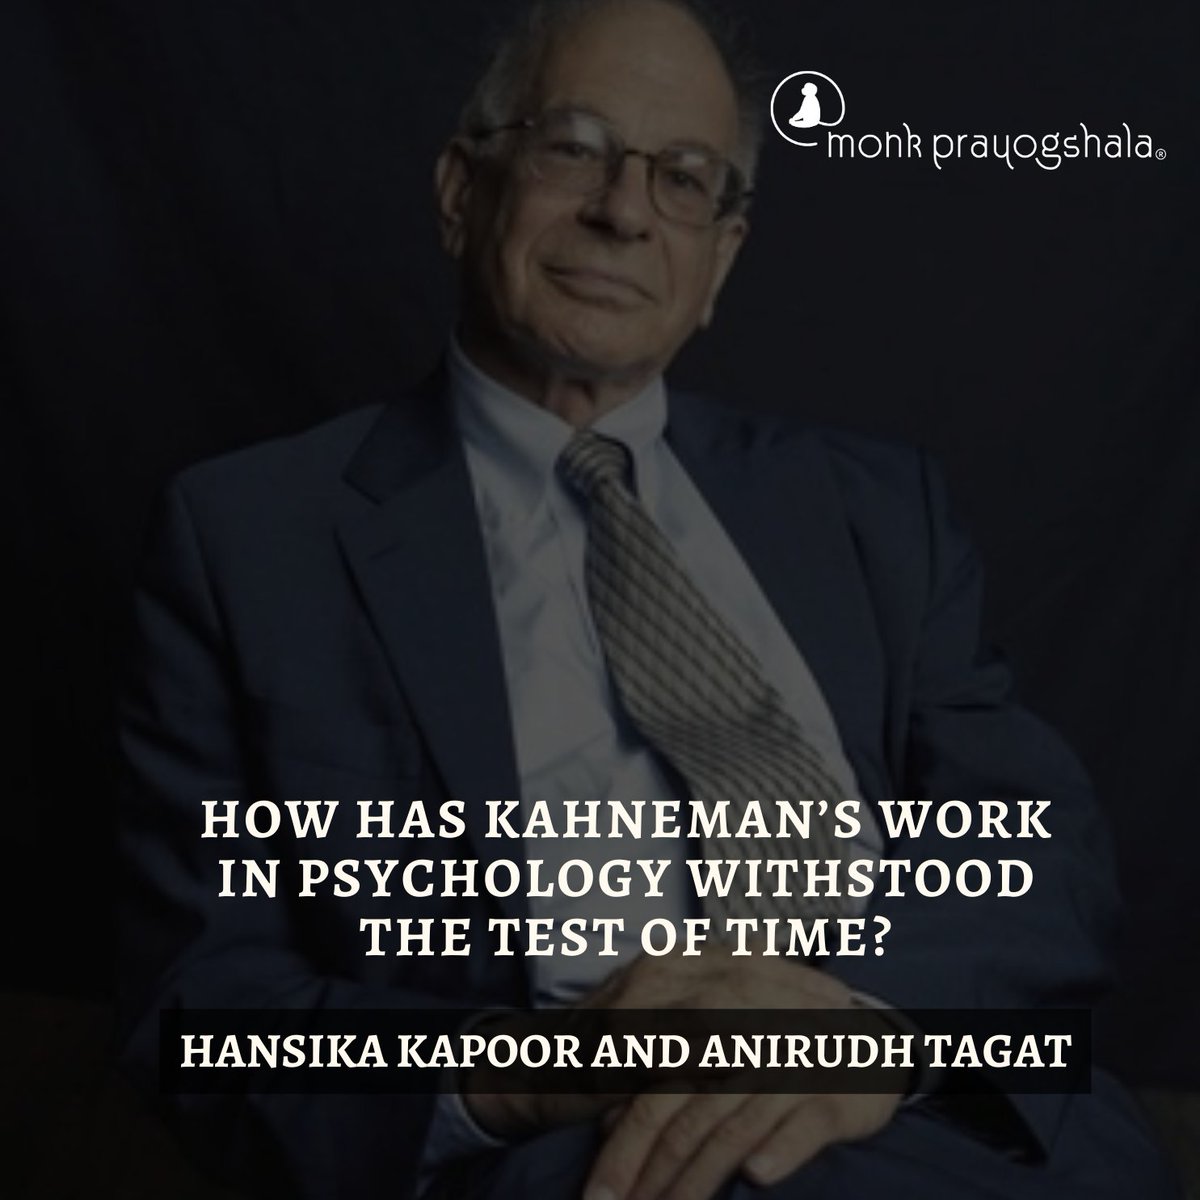 📢 @hansika_kapoor and @inhouseconomist write for this week's #blog 'How has Kahneman's work in #psychology withstood the test of time?'! Check it out now! buff.ly/3wmbffw